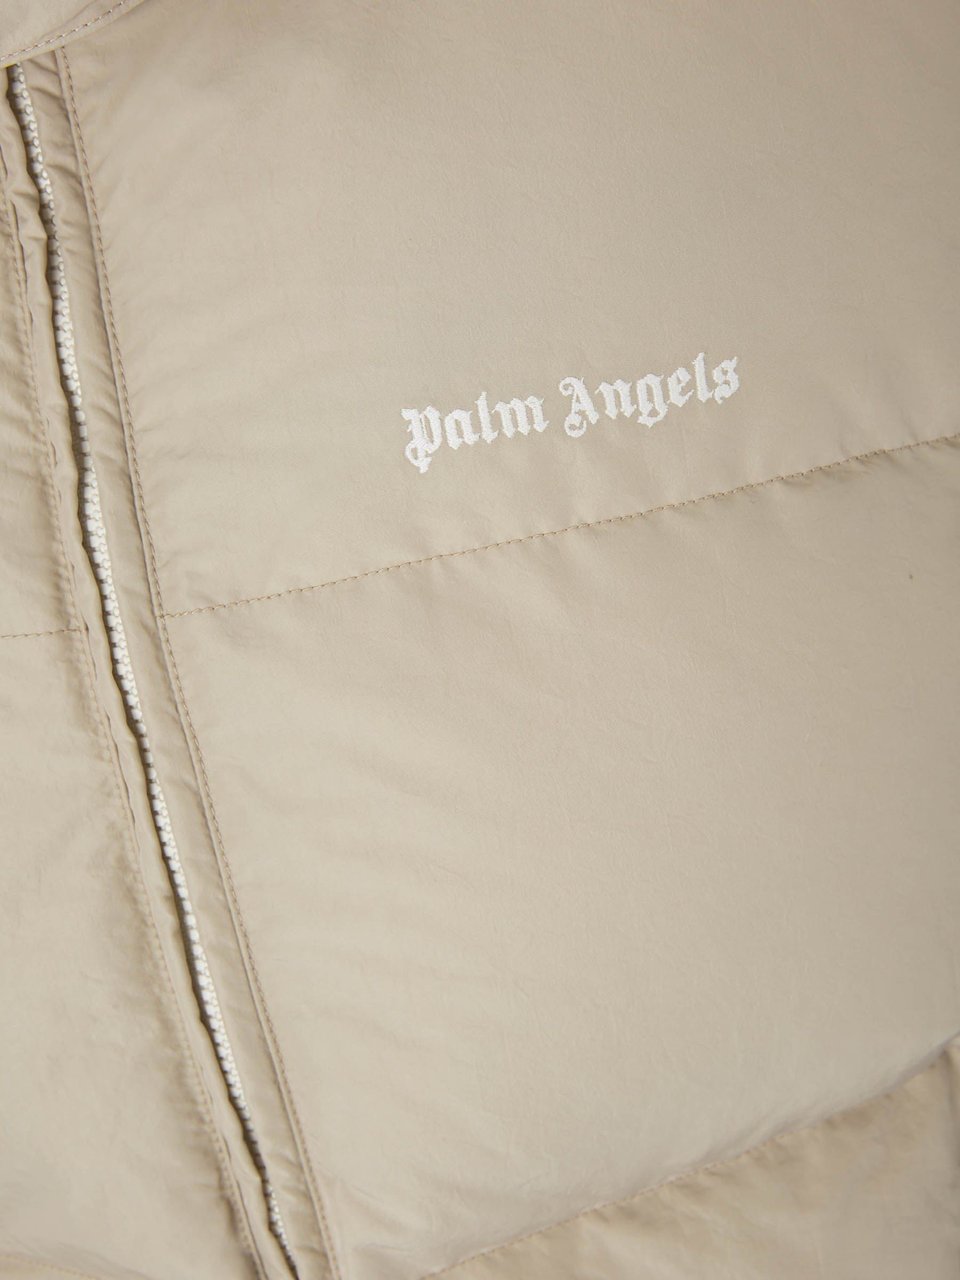 Palm Angels Padded Hooded Vest Divers